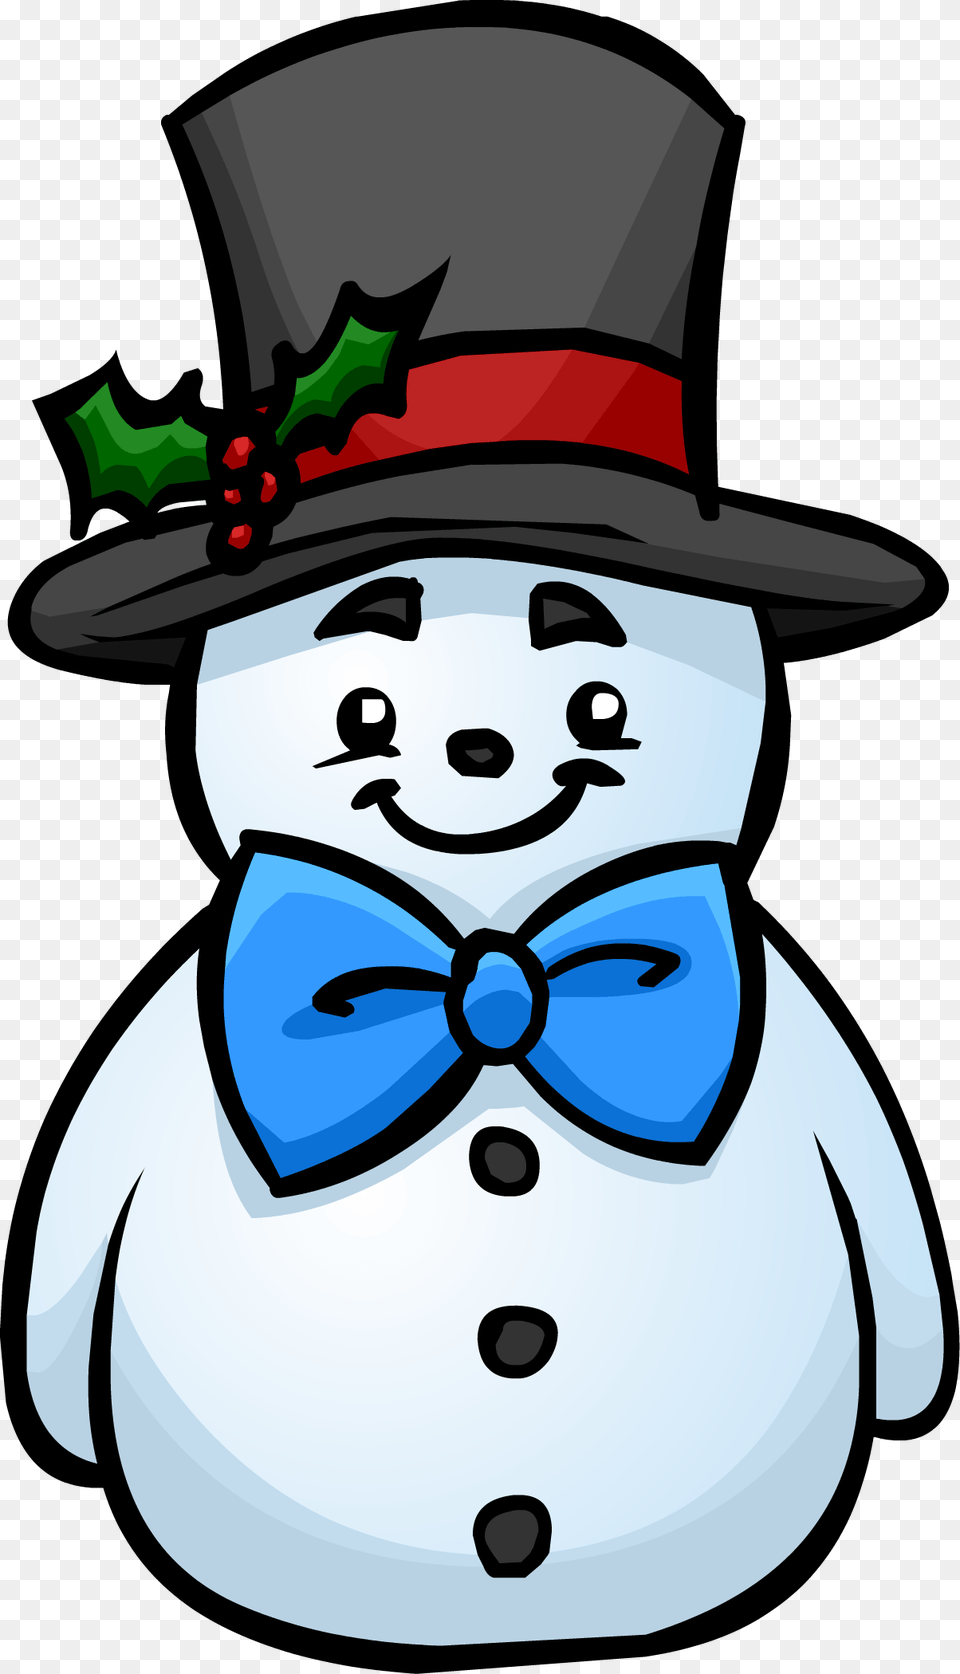 Top Hat Snowman Top Hat For A Snowman, Winter, Nature, Outdoors, Tie Png